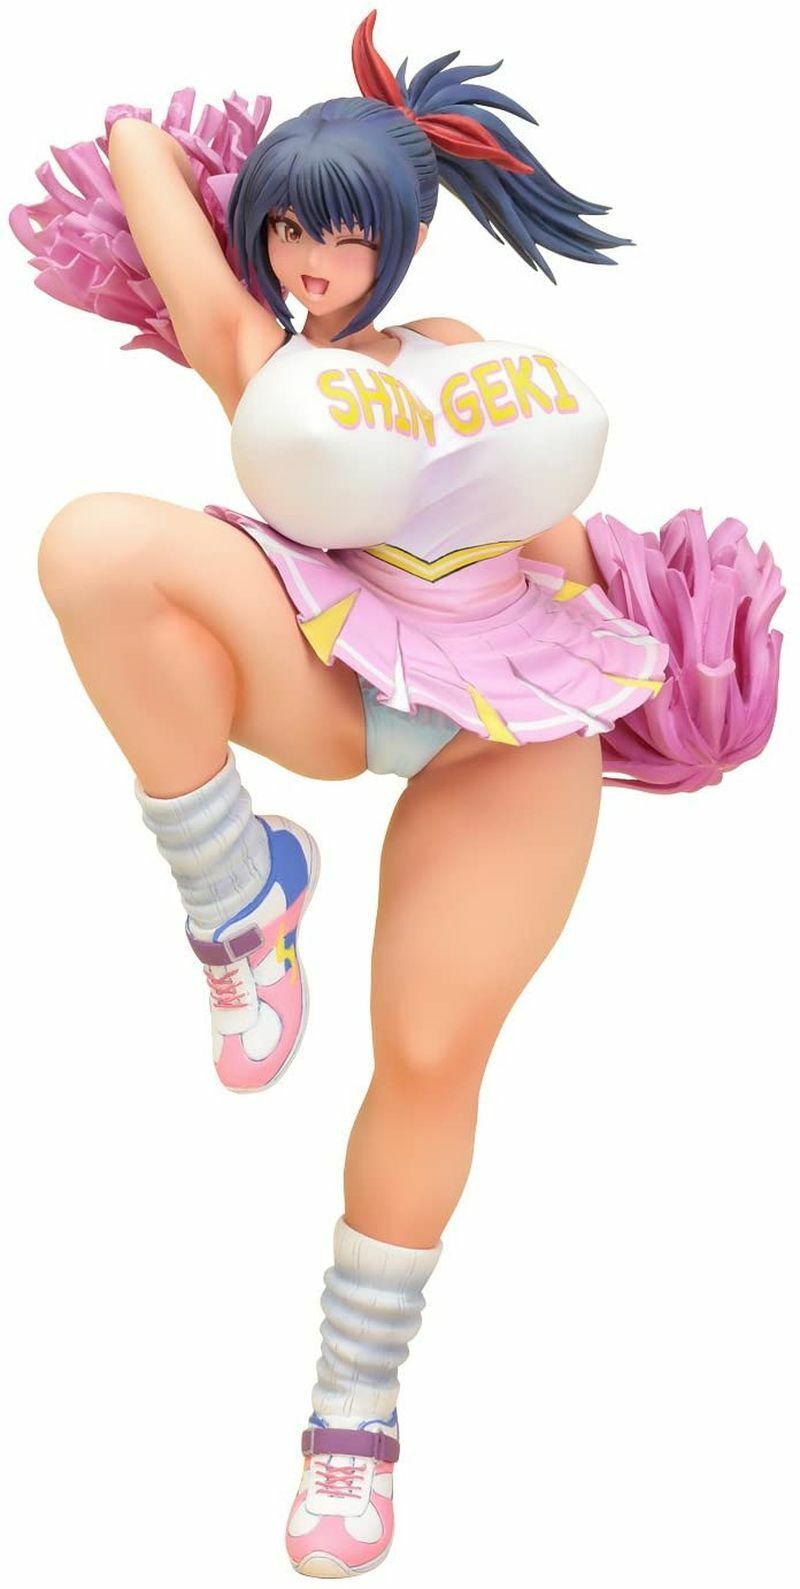 3-7 days from Japan A-Plus Cover Cheer Girl Saki Nishina 1:6 Scale Figure Statue